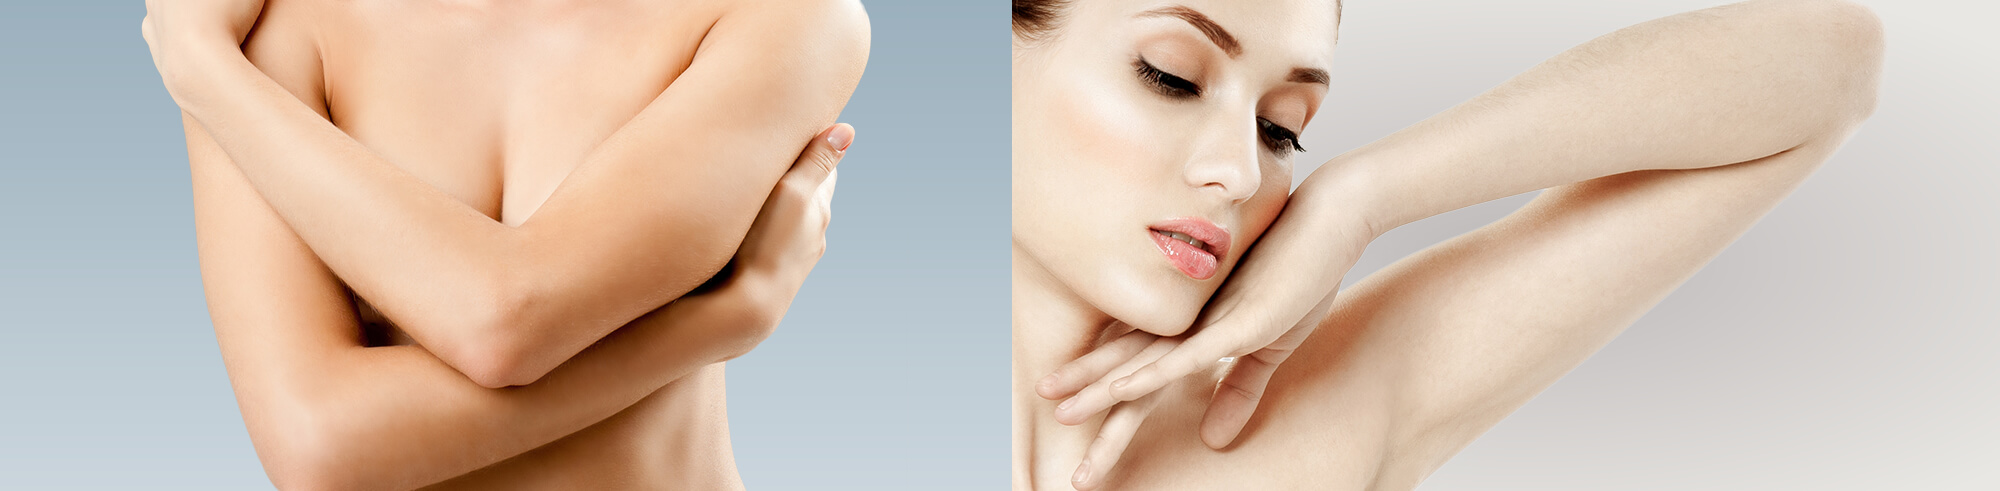 Liposuction And Arm Lift